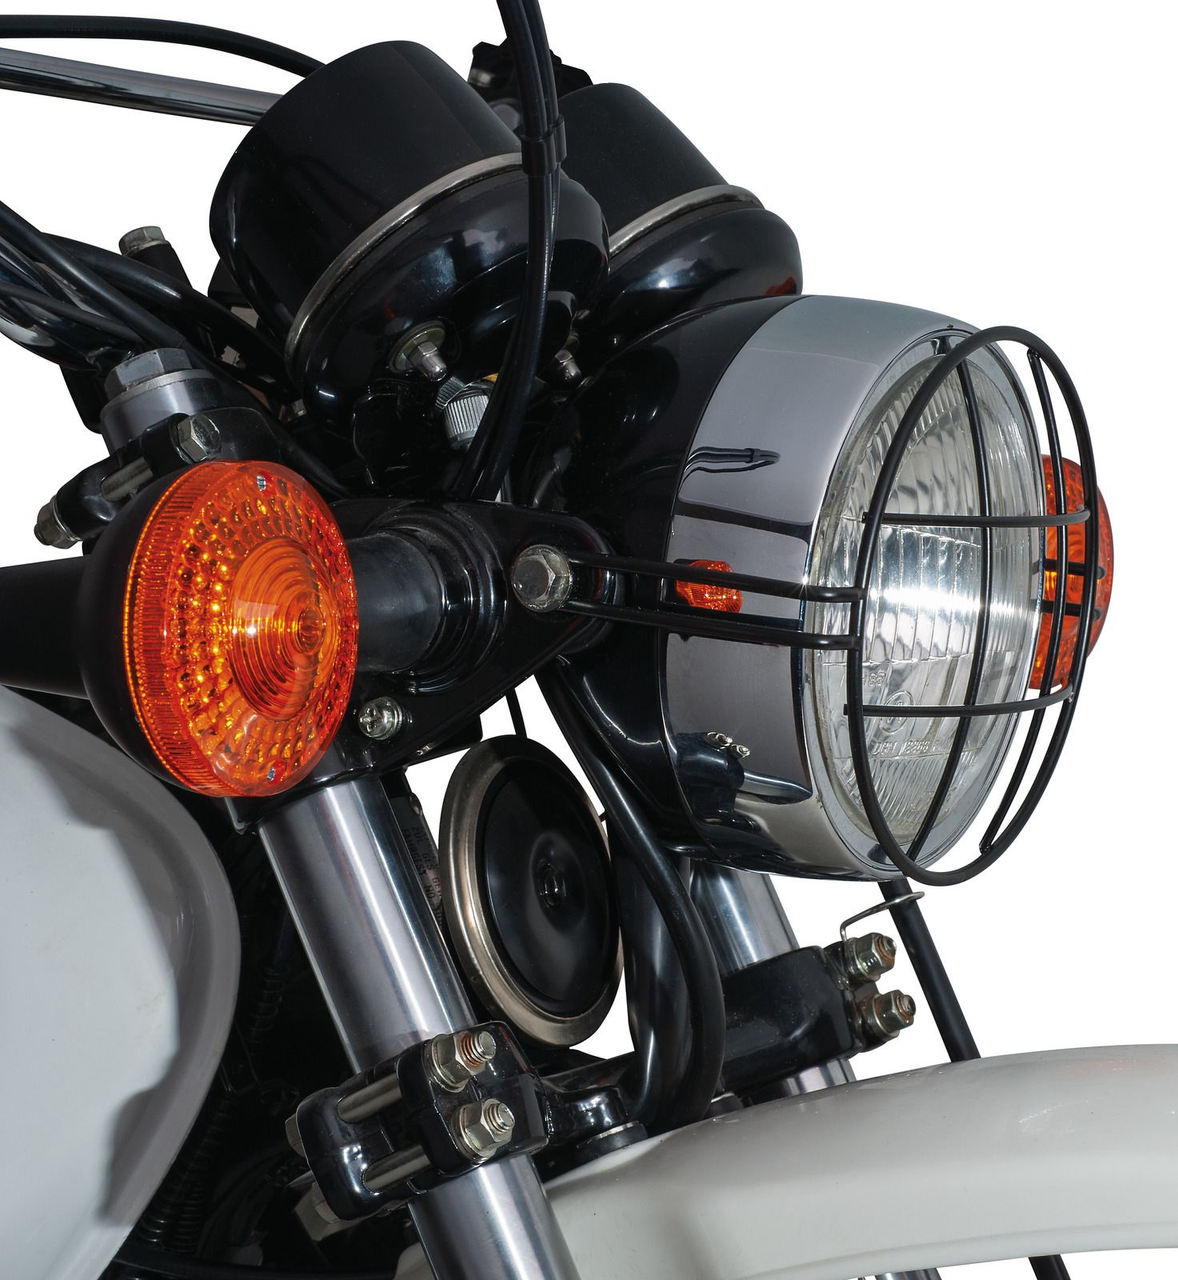 Headlight Grill 'Xcountry', black coated, suitable for headlight diameters max. 180mm (overall external diameter!)